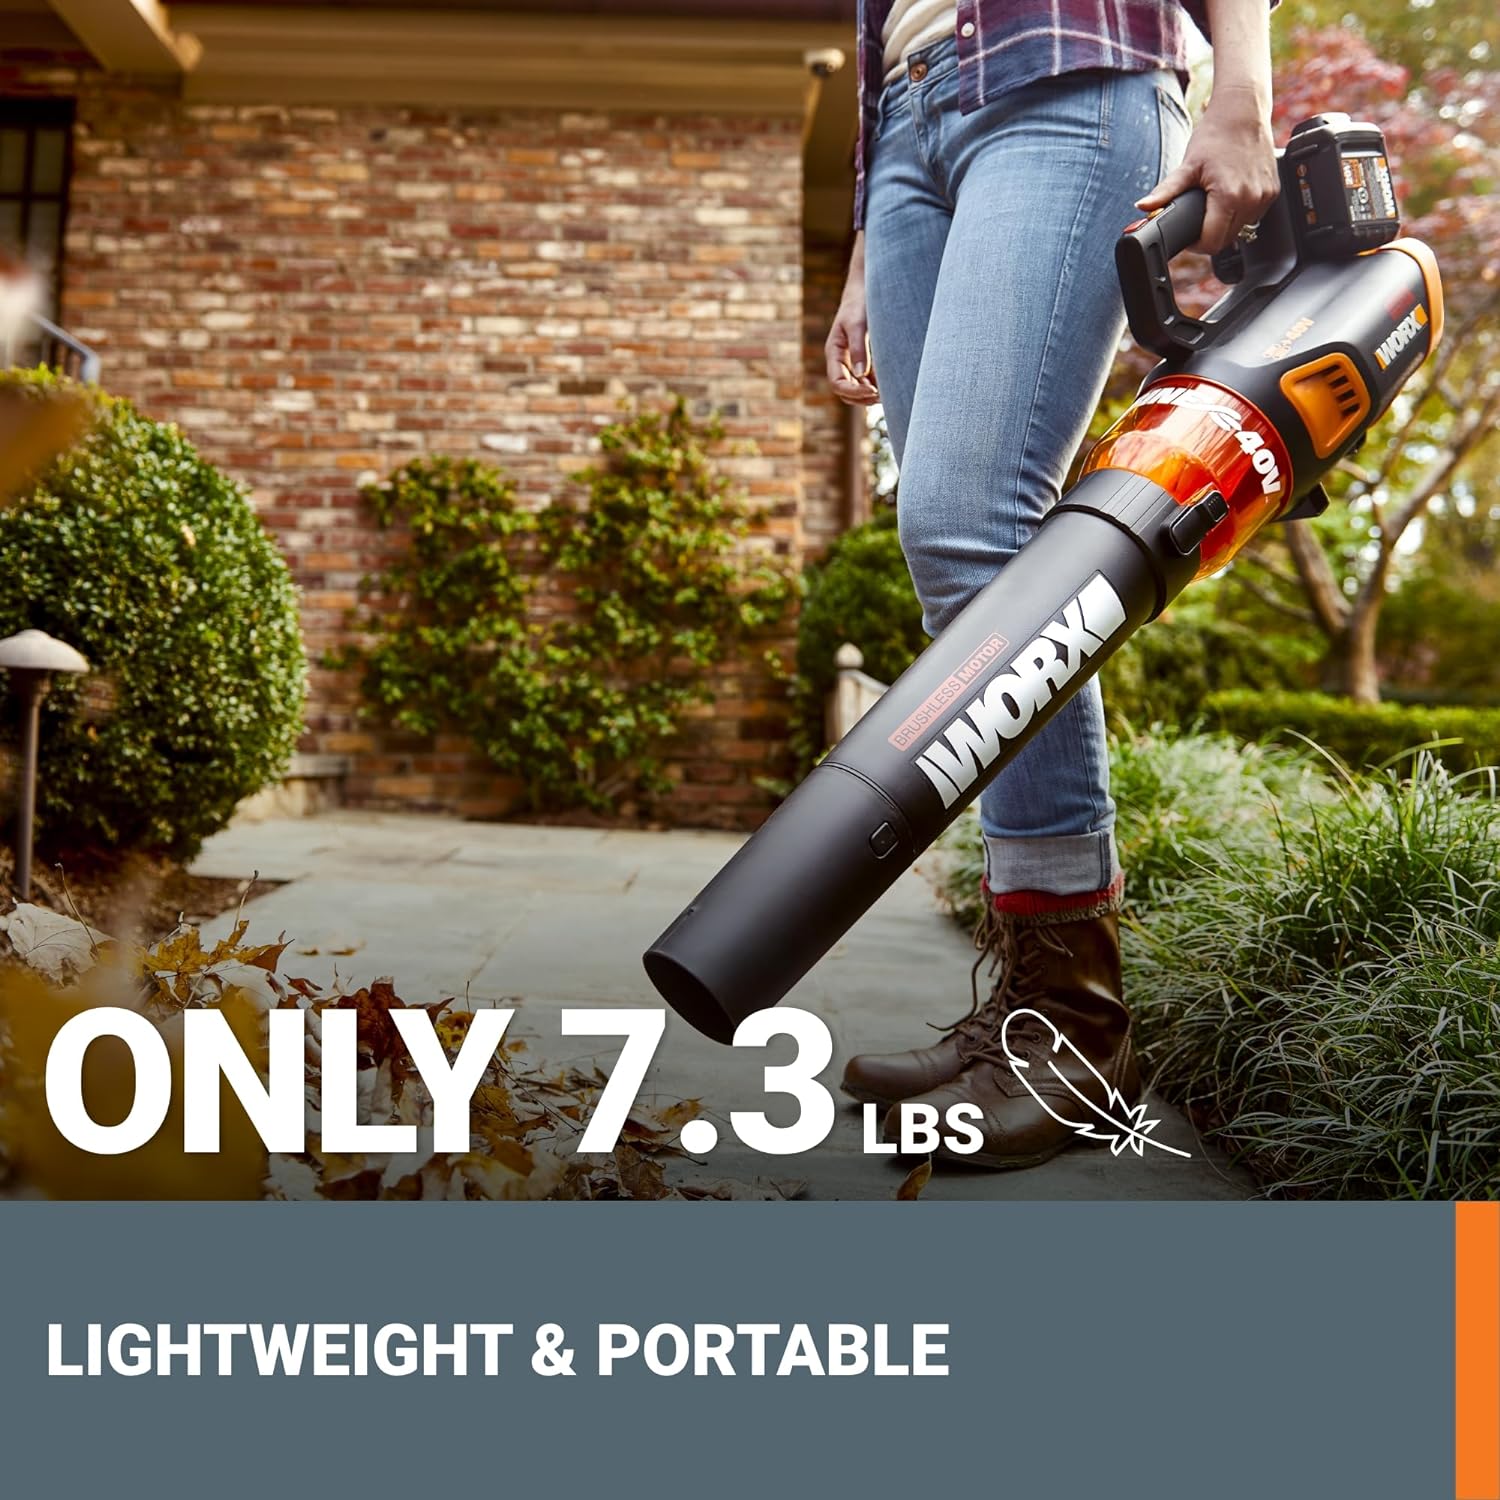 https://bigbigmart.com/wp-content/uploads/2023/10/Worx-40V-Turbine-Leaf-Blower-Cordless-with-Battery-and-Charger-Brushless-Motor-Blowers-for-Lawn-Care-Compact-and-Lightweight-Cordless-Leaf-Blower-WG584-%E2%80%93-2-Batteries-Charger-Included3.jpg